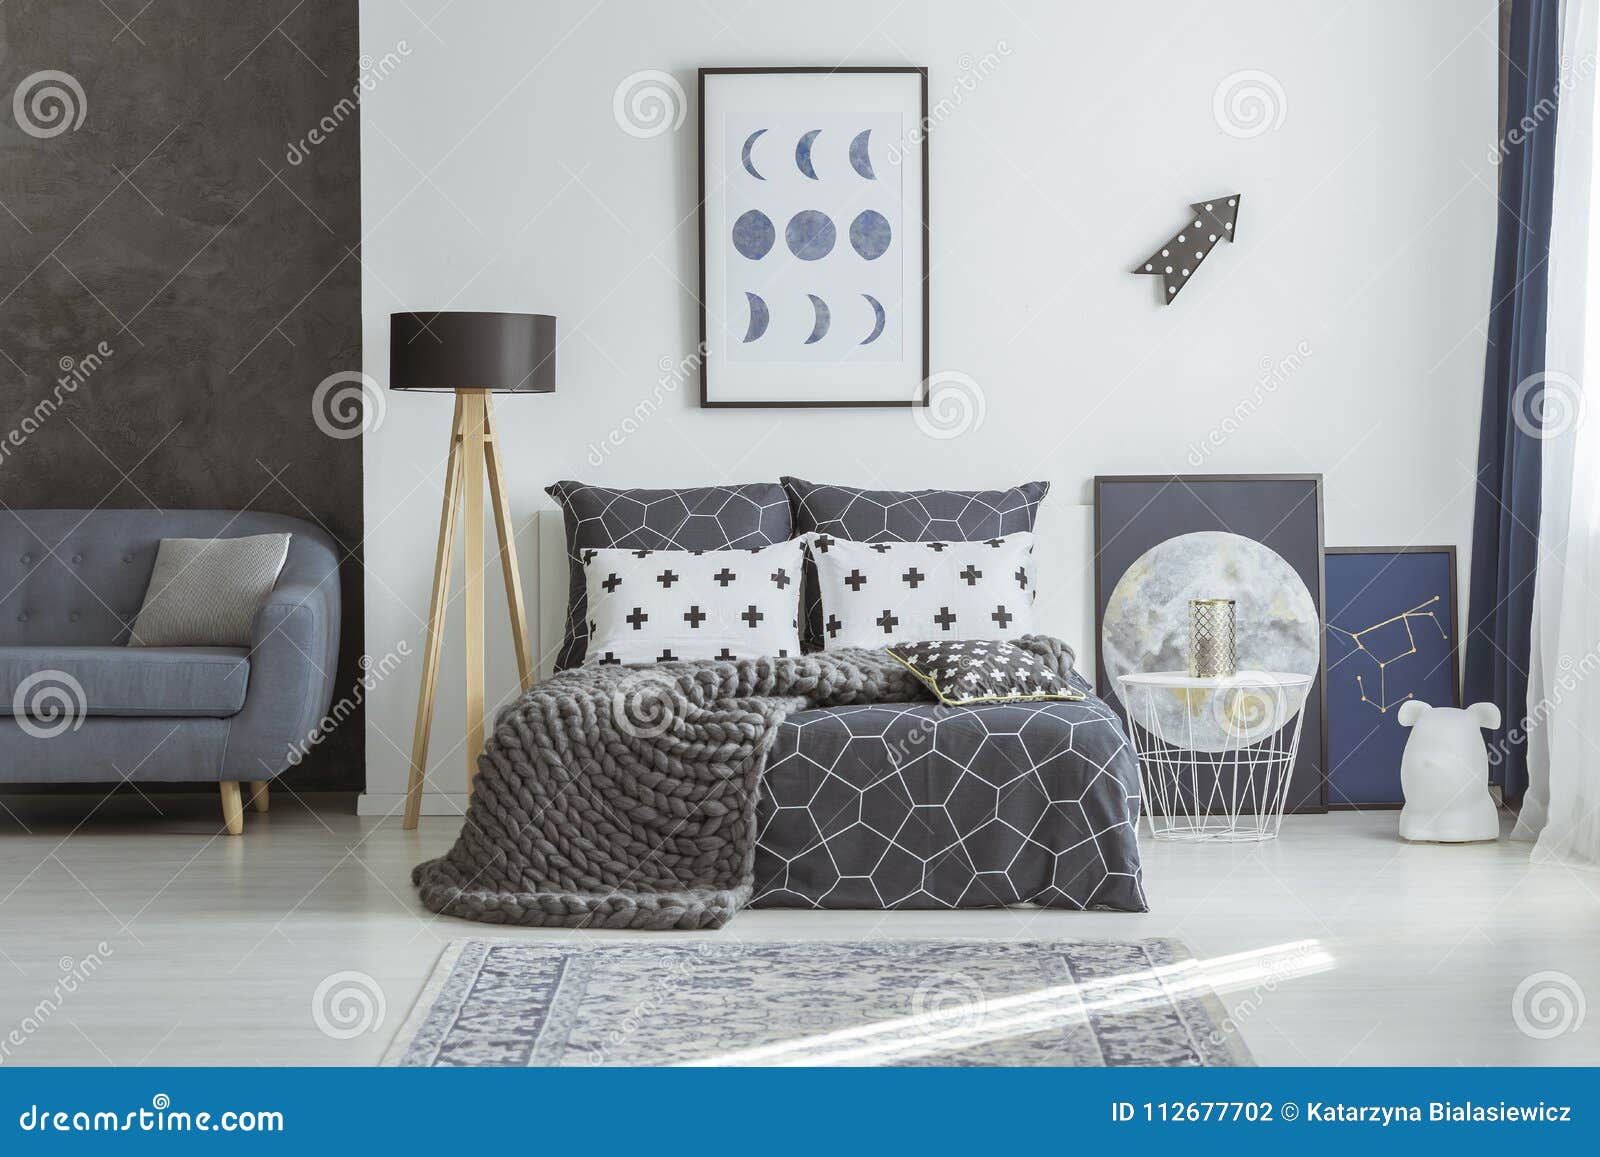 Sofa in navy blue bedroom stock photo Image of bright 